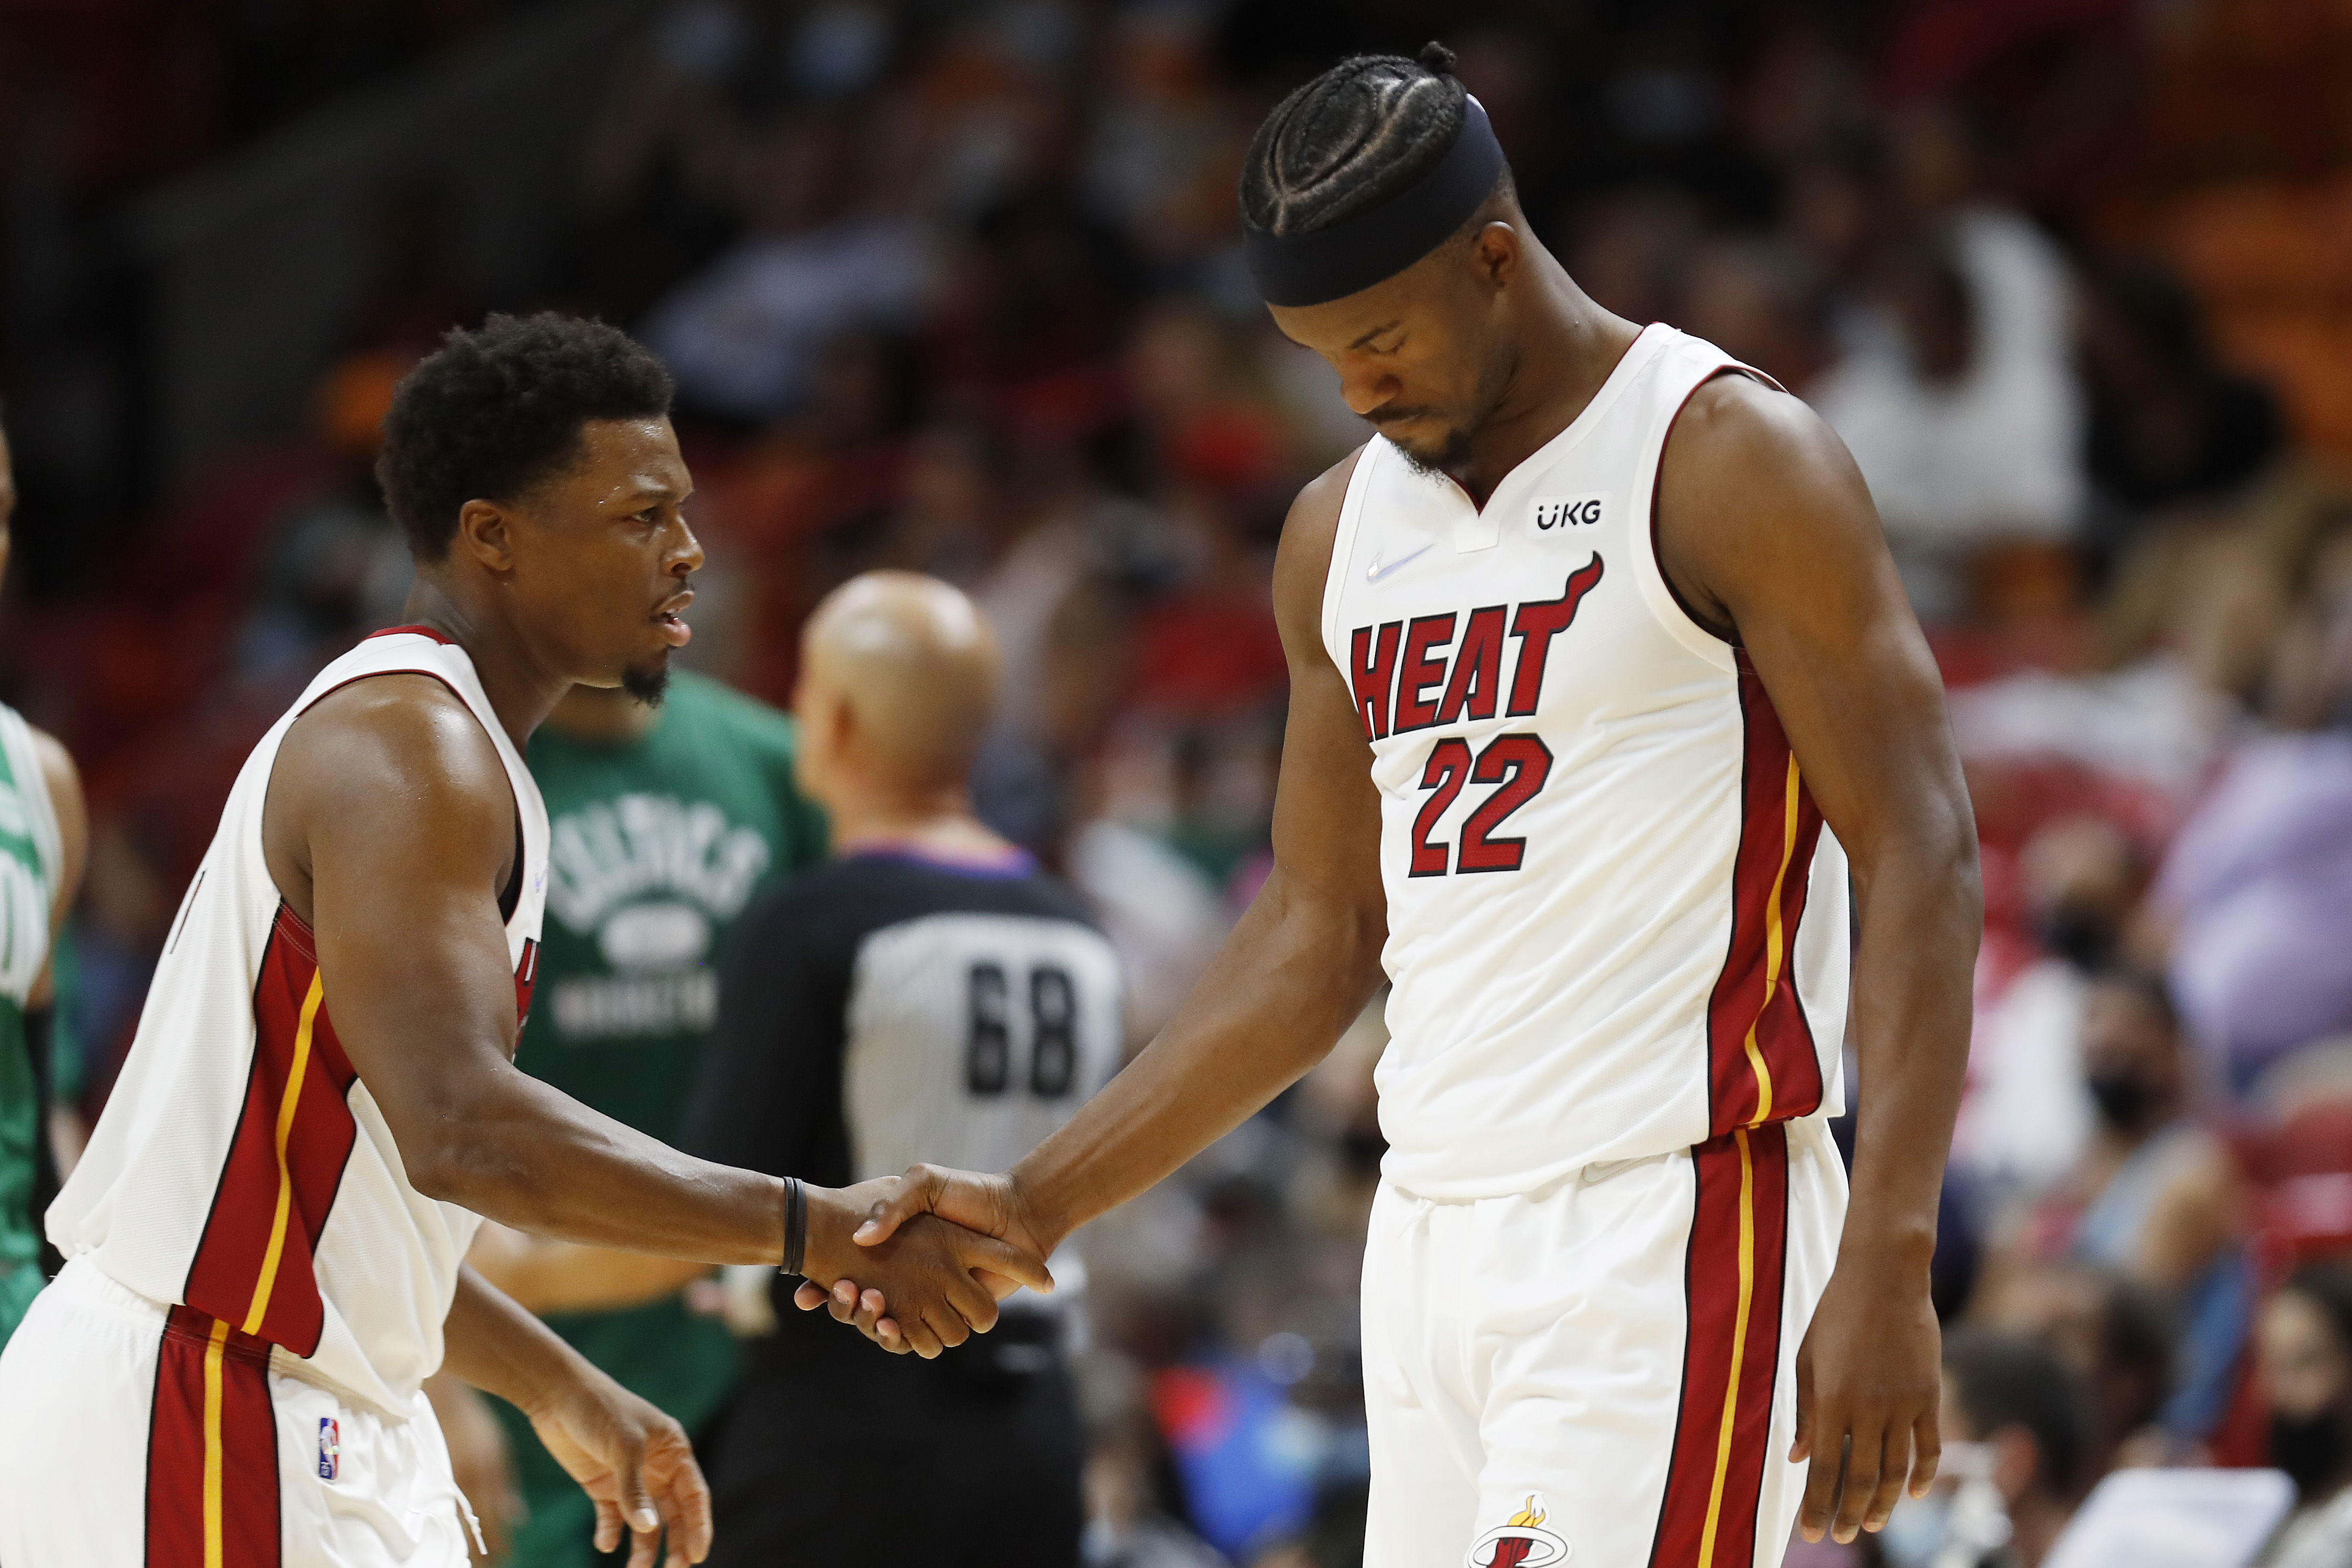 Miami Heat stars Jimmy Butler and Kyle Lowry shake hands during a preseason game